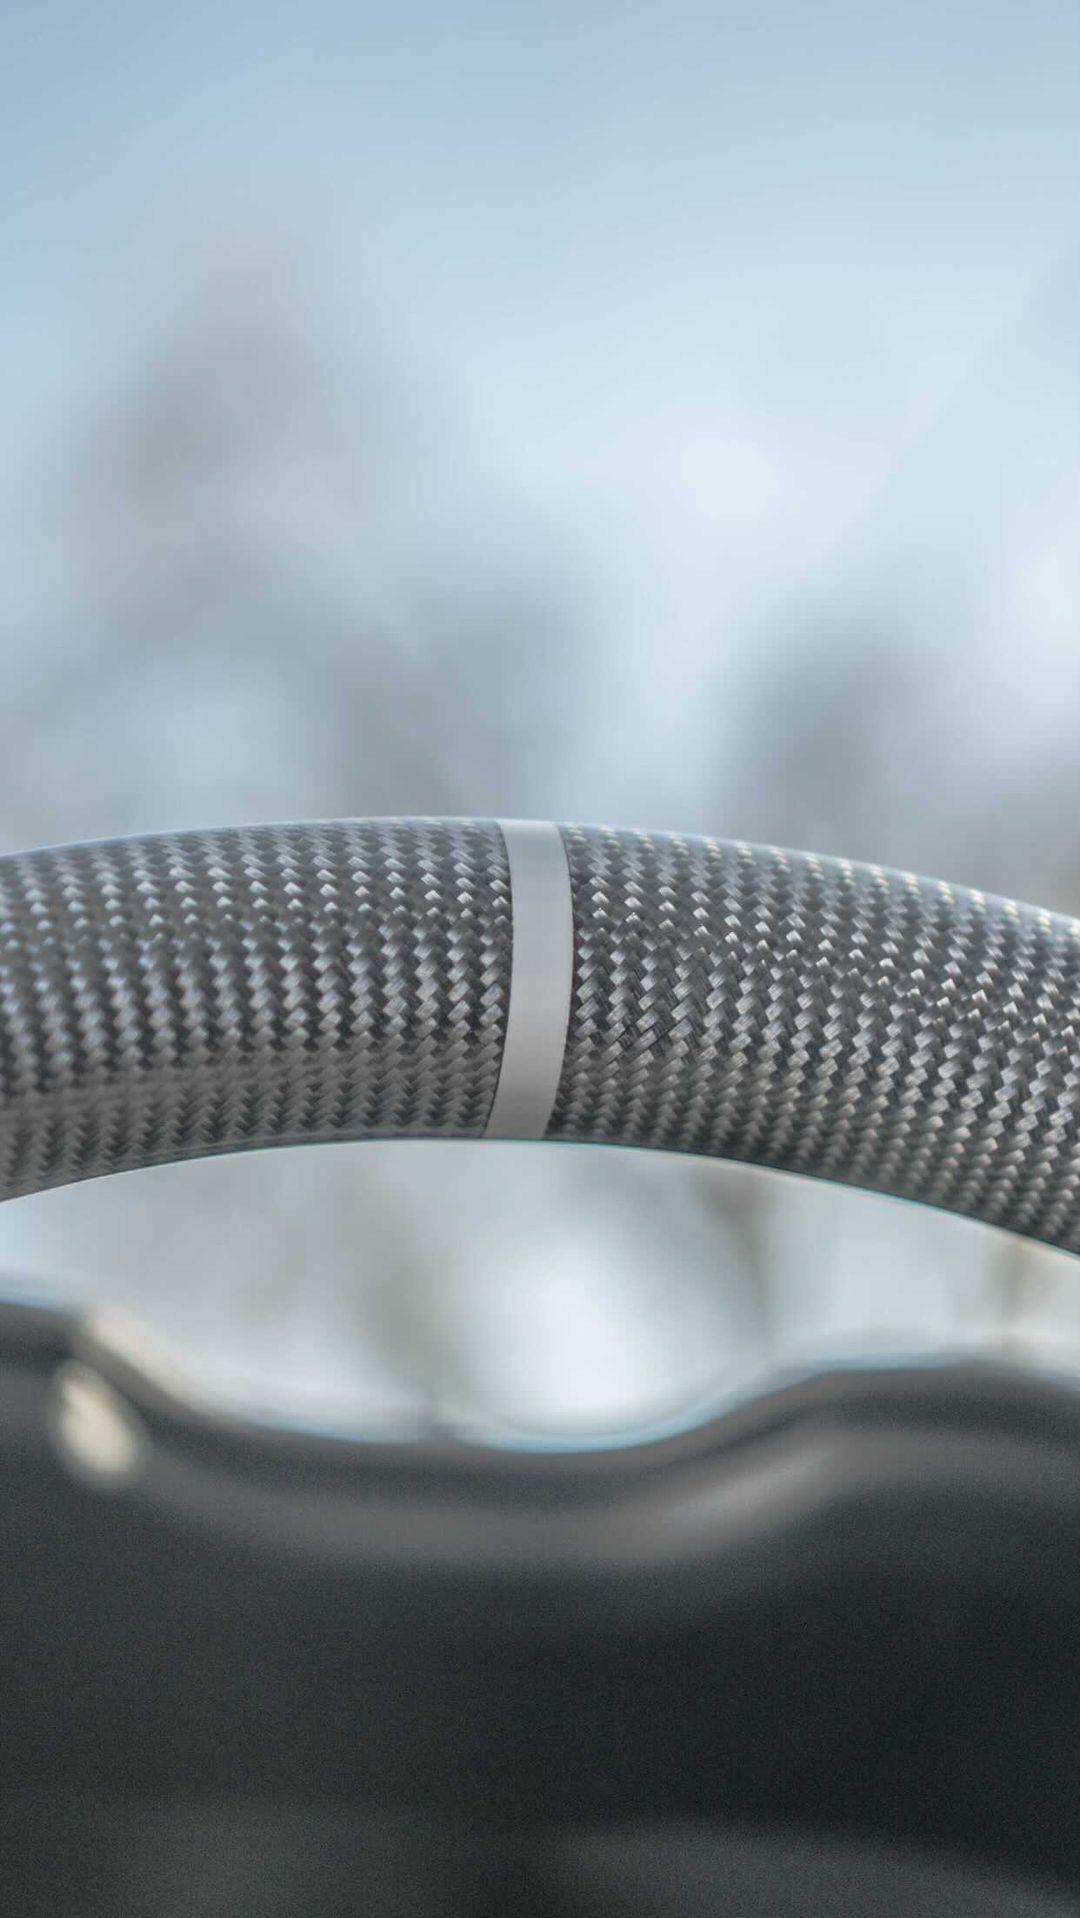 Close-up shot capturing the intricate details of a gray stripe on Jalisco's CarbonFiber Steering Wheel.